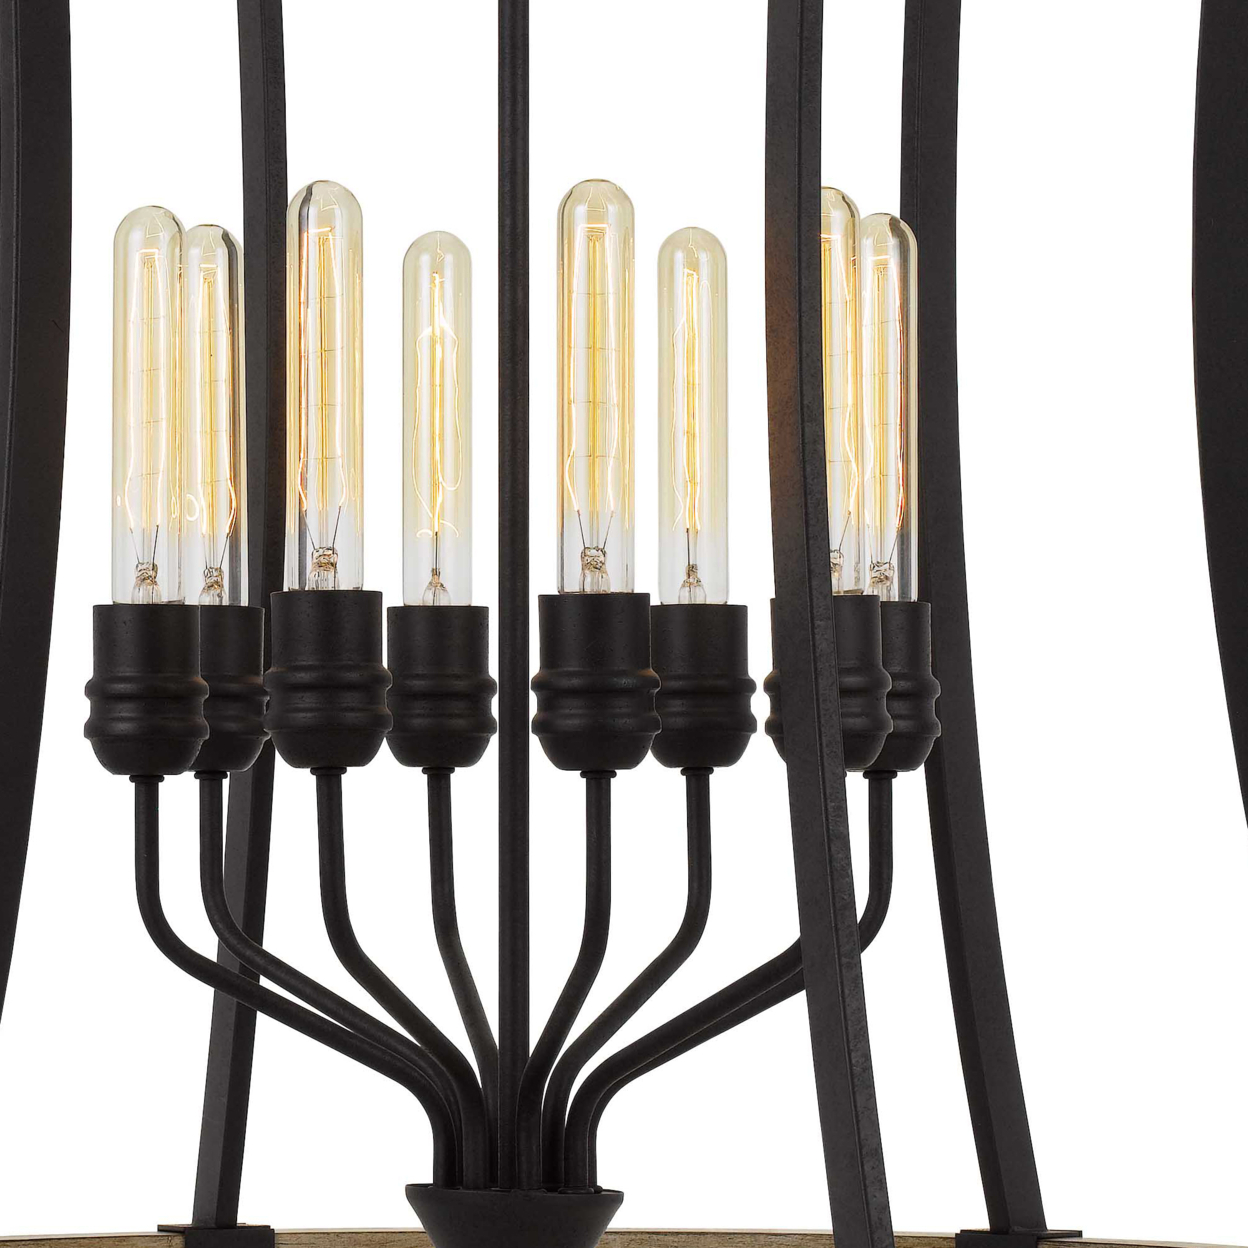 8 Bulb Chandelier With Wooden And Metal Frame, Brown And Black- Saltoro Sherpi